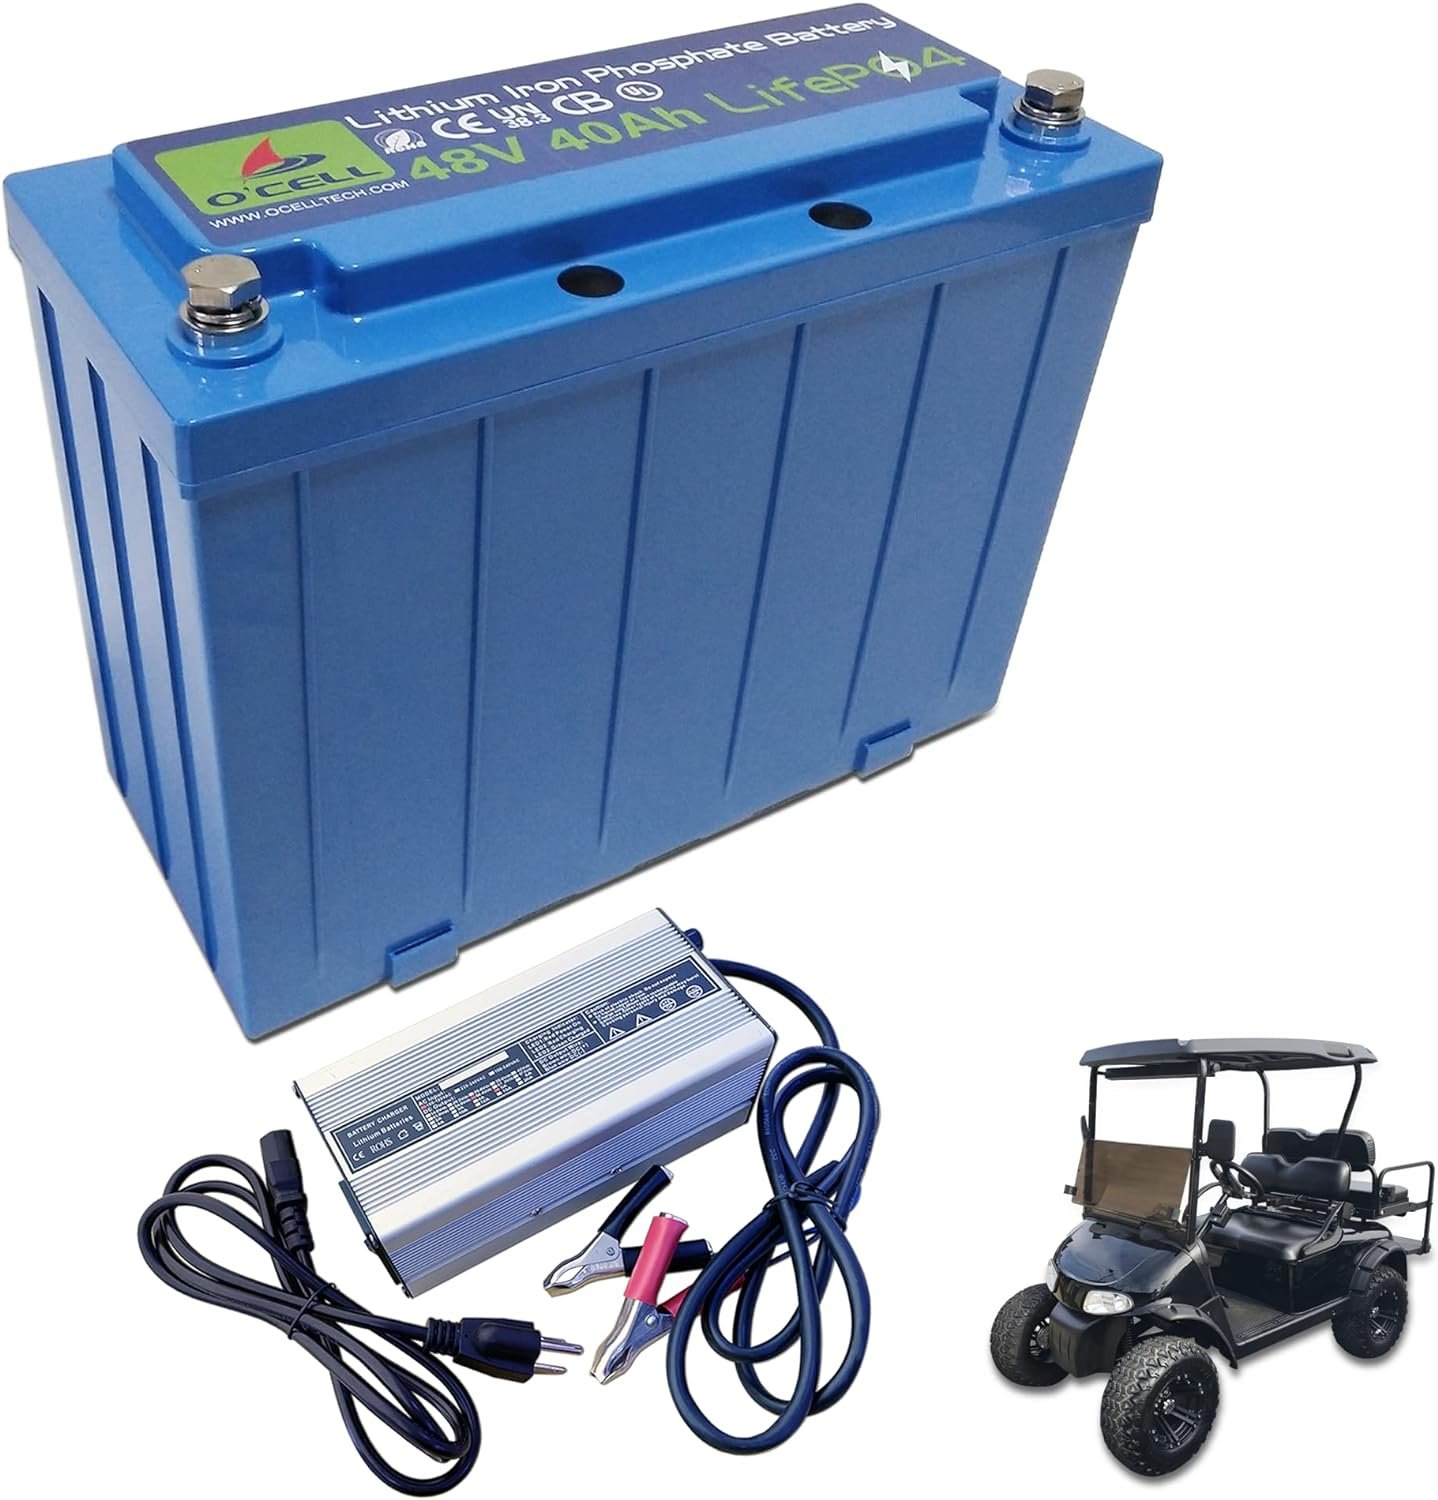 OCELL [2-3 Days Delivery] 48V 40Ah LiFePO4 Lithium Deep Cycle Battery 10 Years Lifespan + 58.4V 5A Charger, 4096W Power Rechargeable Battery for Golf Cart, Club Car, Summer Off-Grid Outages, RV, Boat